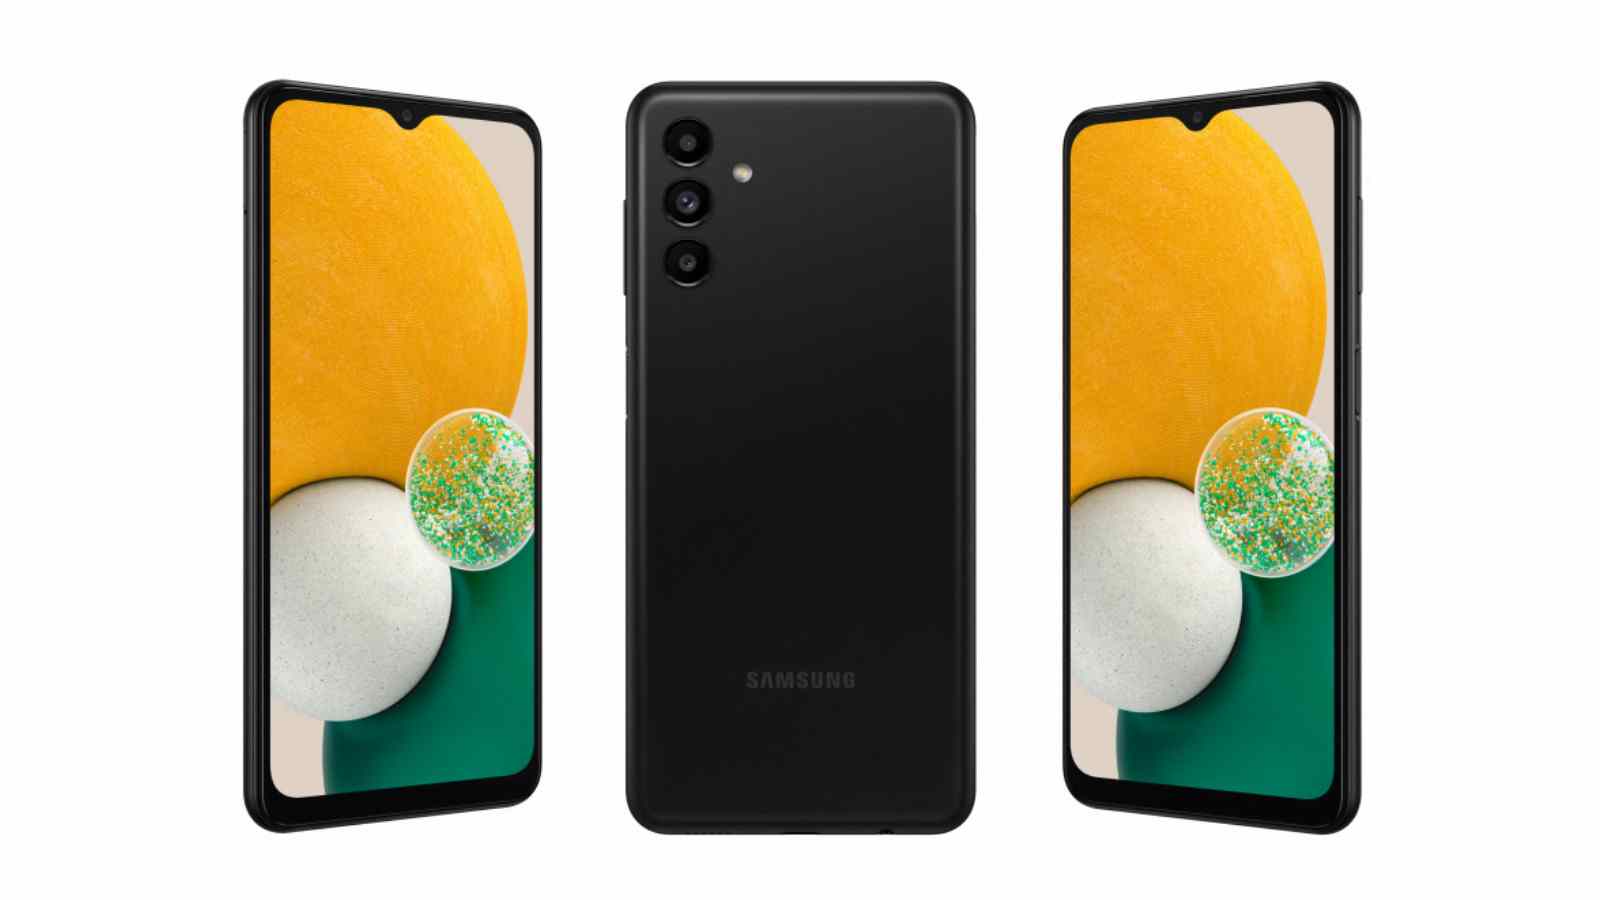 Samsung Galaxy A13 5G with MediTek Dimensity 700, 50MP triple rear camera launched: Price, Specifications